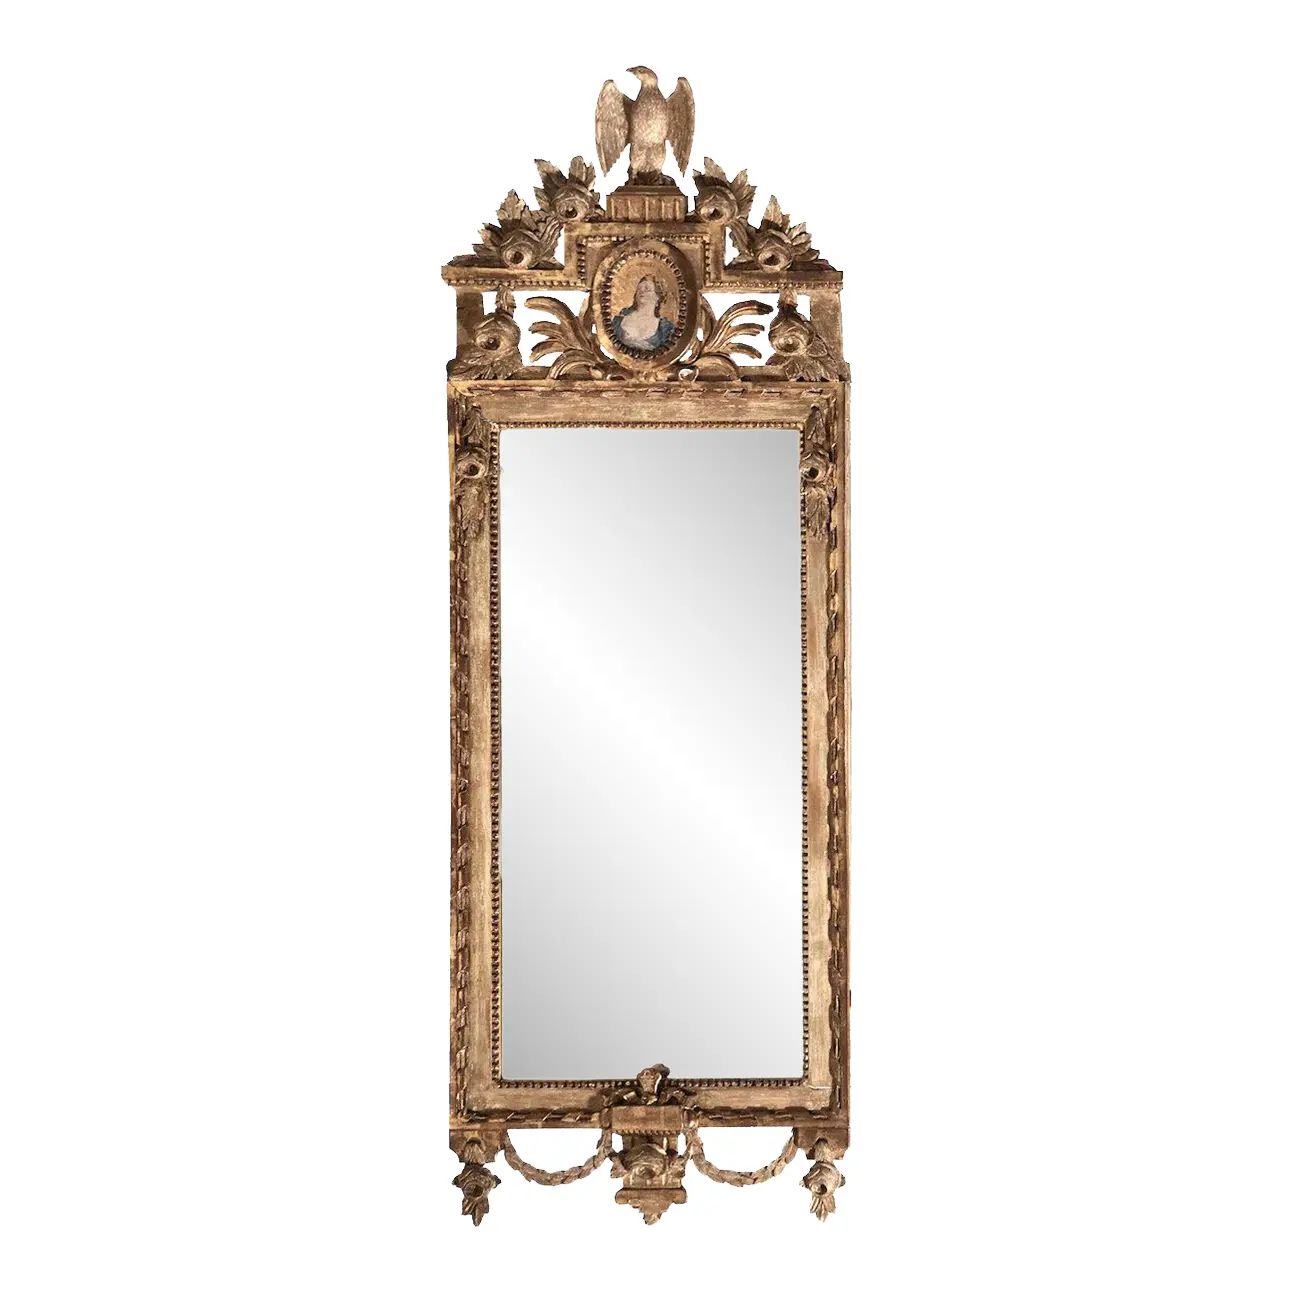 Gustavian Mirror with Rich Carving & Gilding, 1770s | Chairish